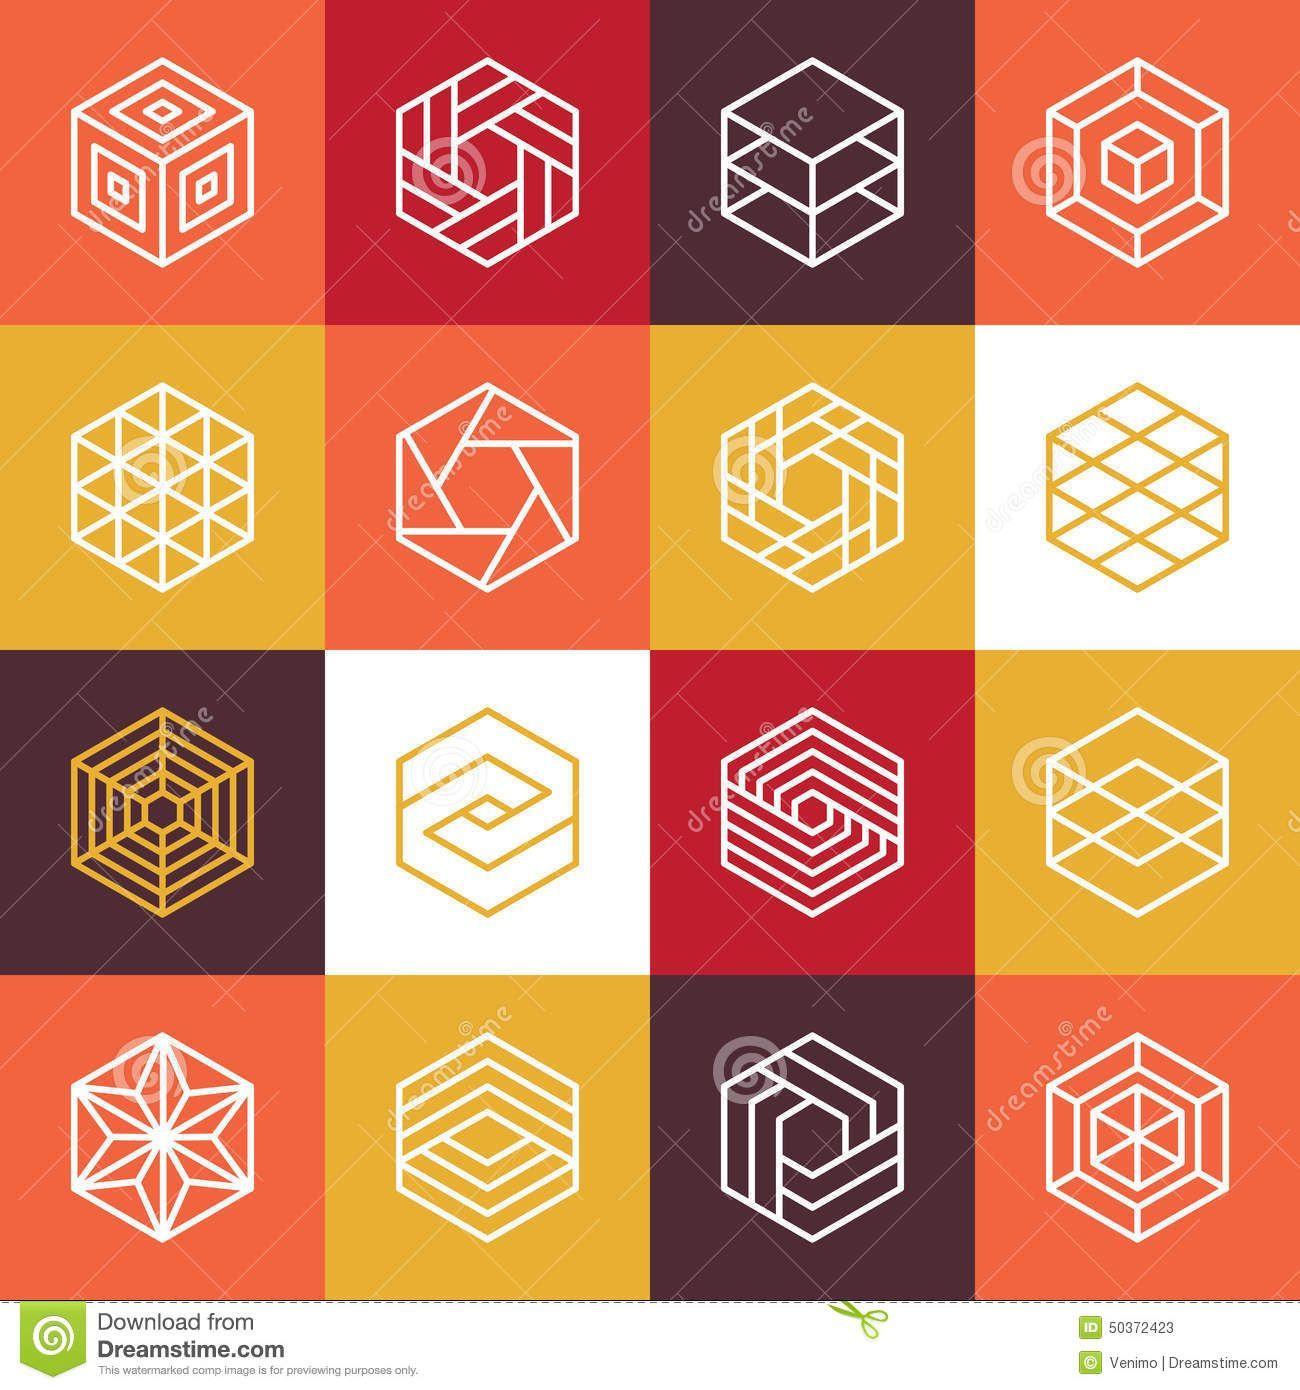 Hexagon Corporate Logo - Vector Linear Hexagon Logos And Design Elements - Download From Over ...